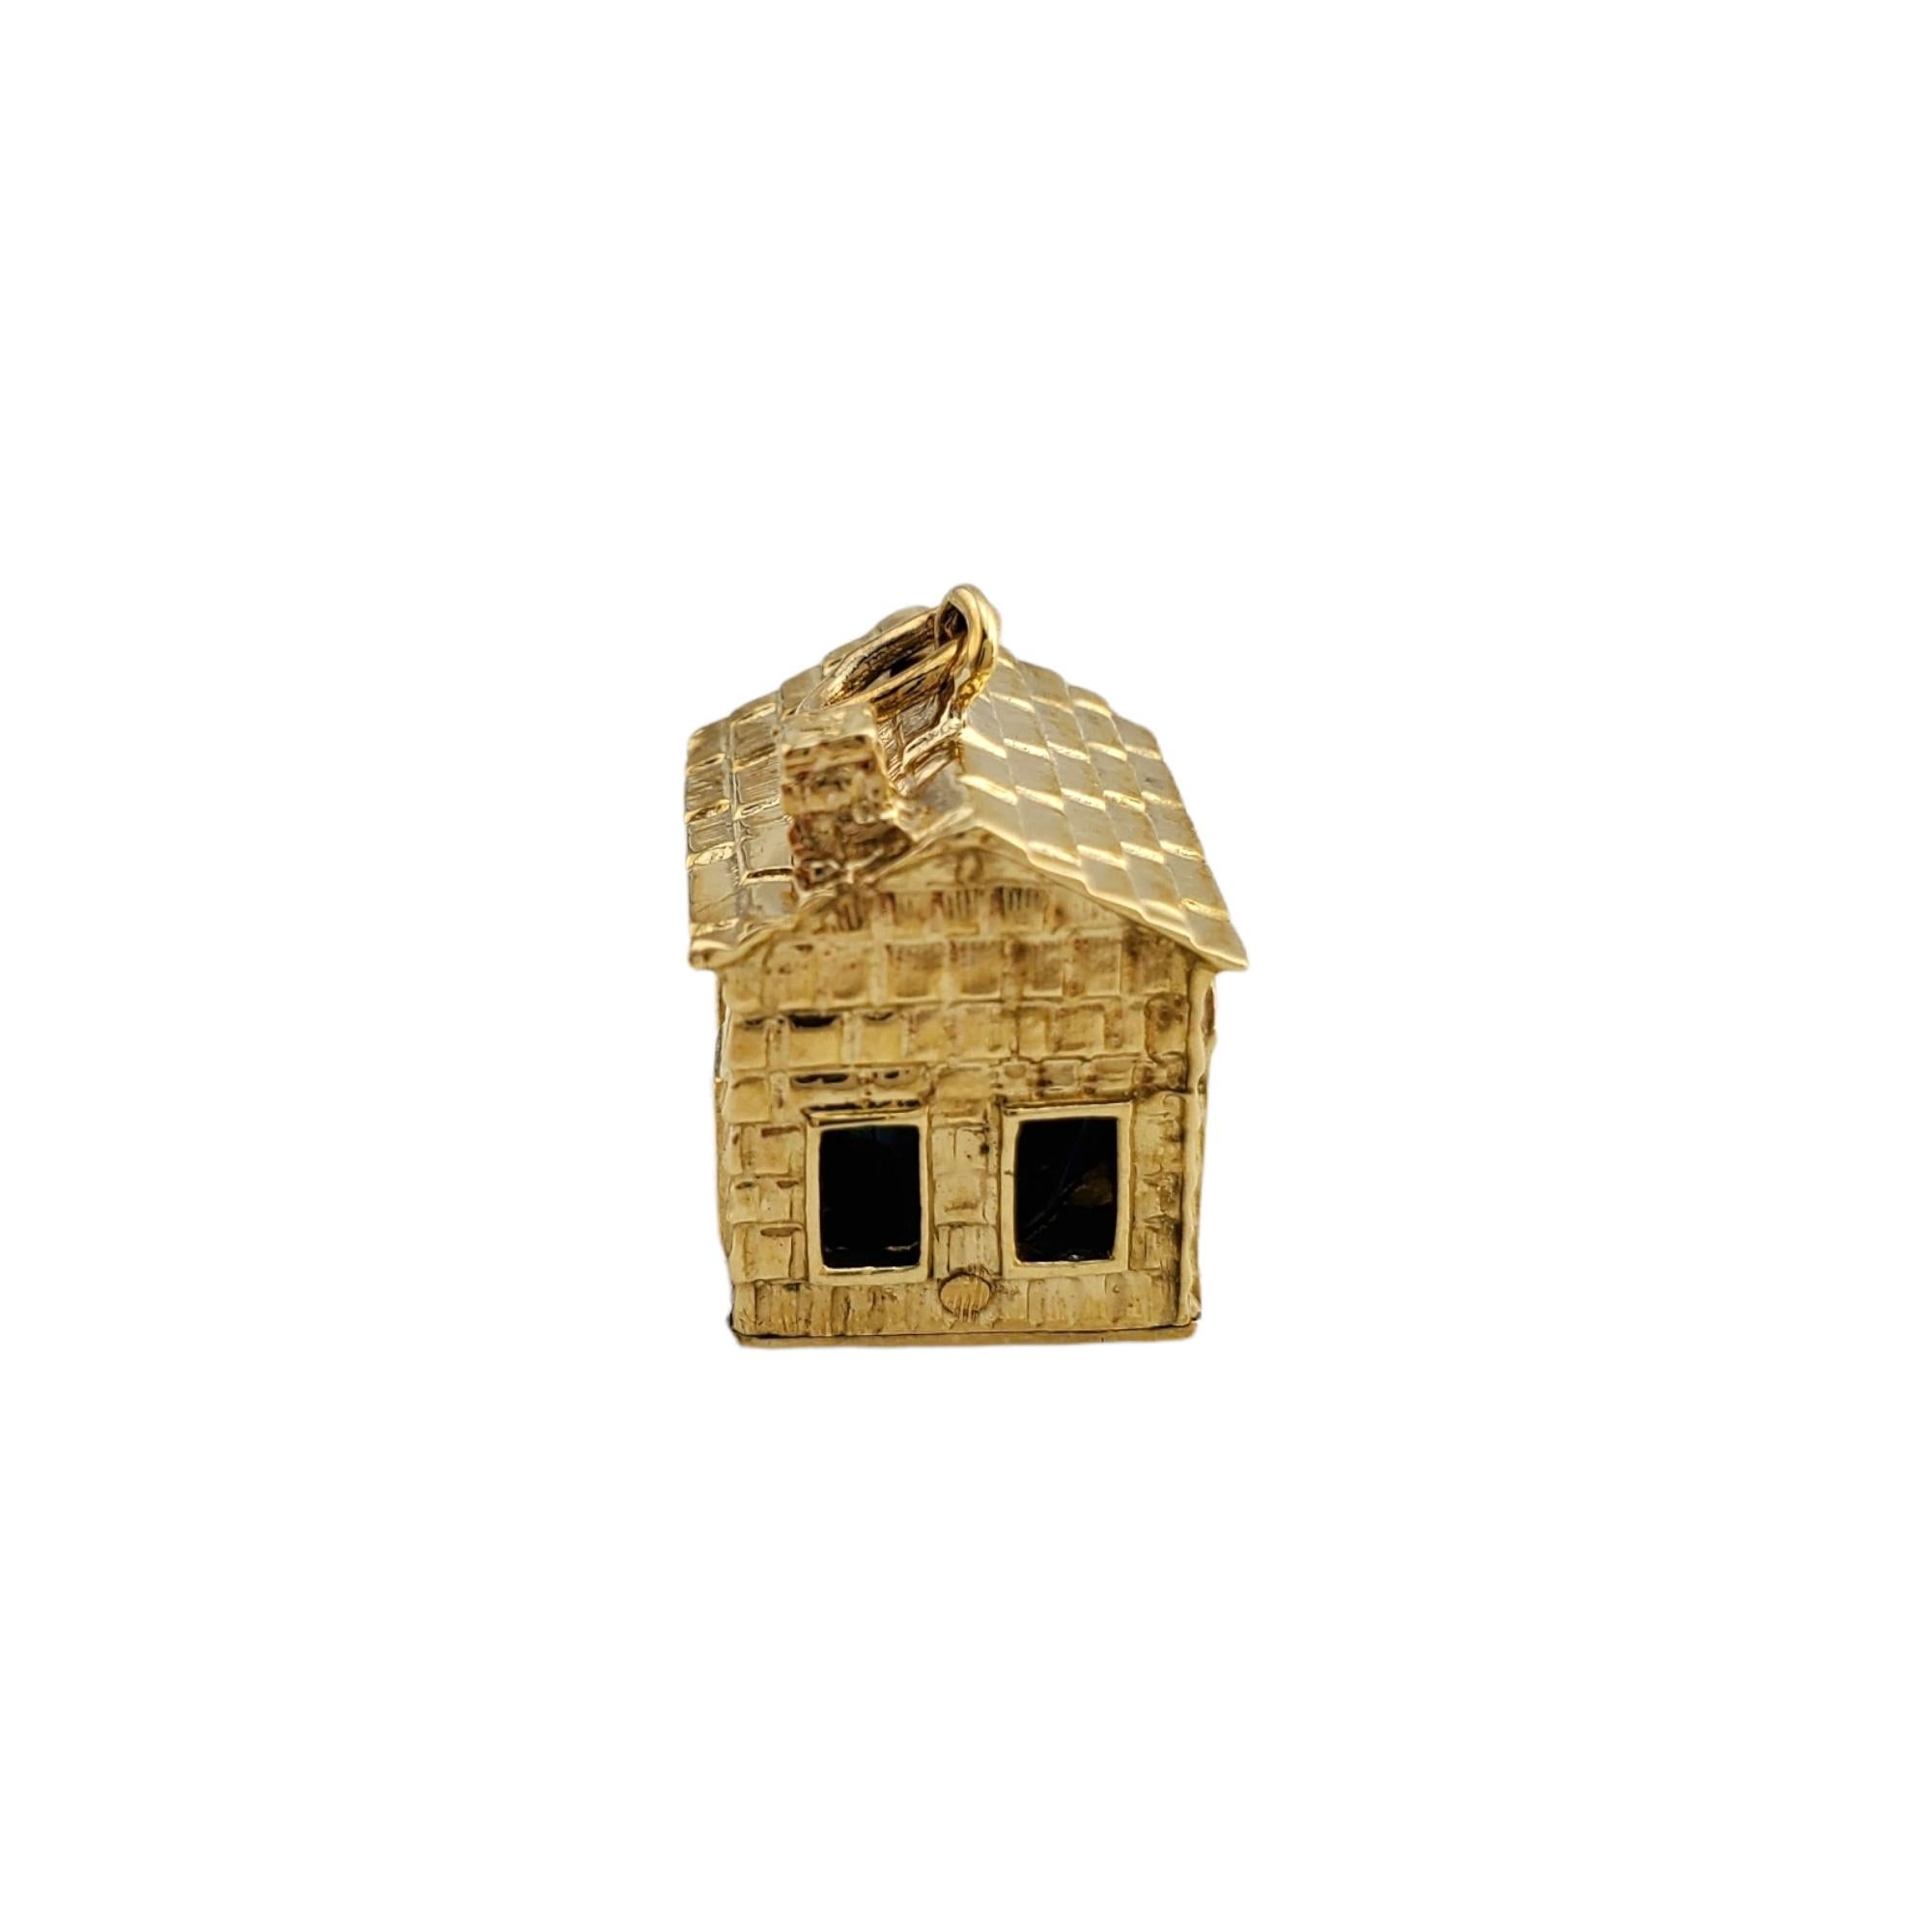 Vintage 14K Yellow Gold House Charm 

 You’ll love this adoorable house charm!

Size: 12.74mm X 17.37mm

Weight:  6.7gr / 4.3 dwt

Very good condition, professionally polished.

Will come packaged in a gift box and will be shipped U.S. Priority Mail